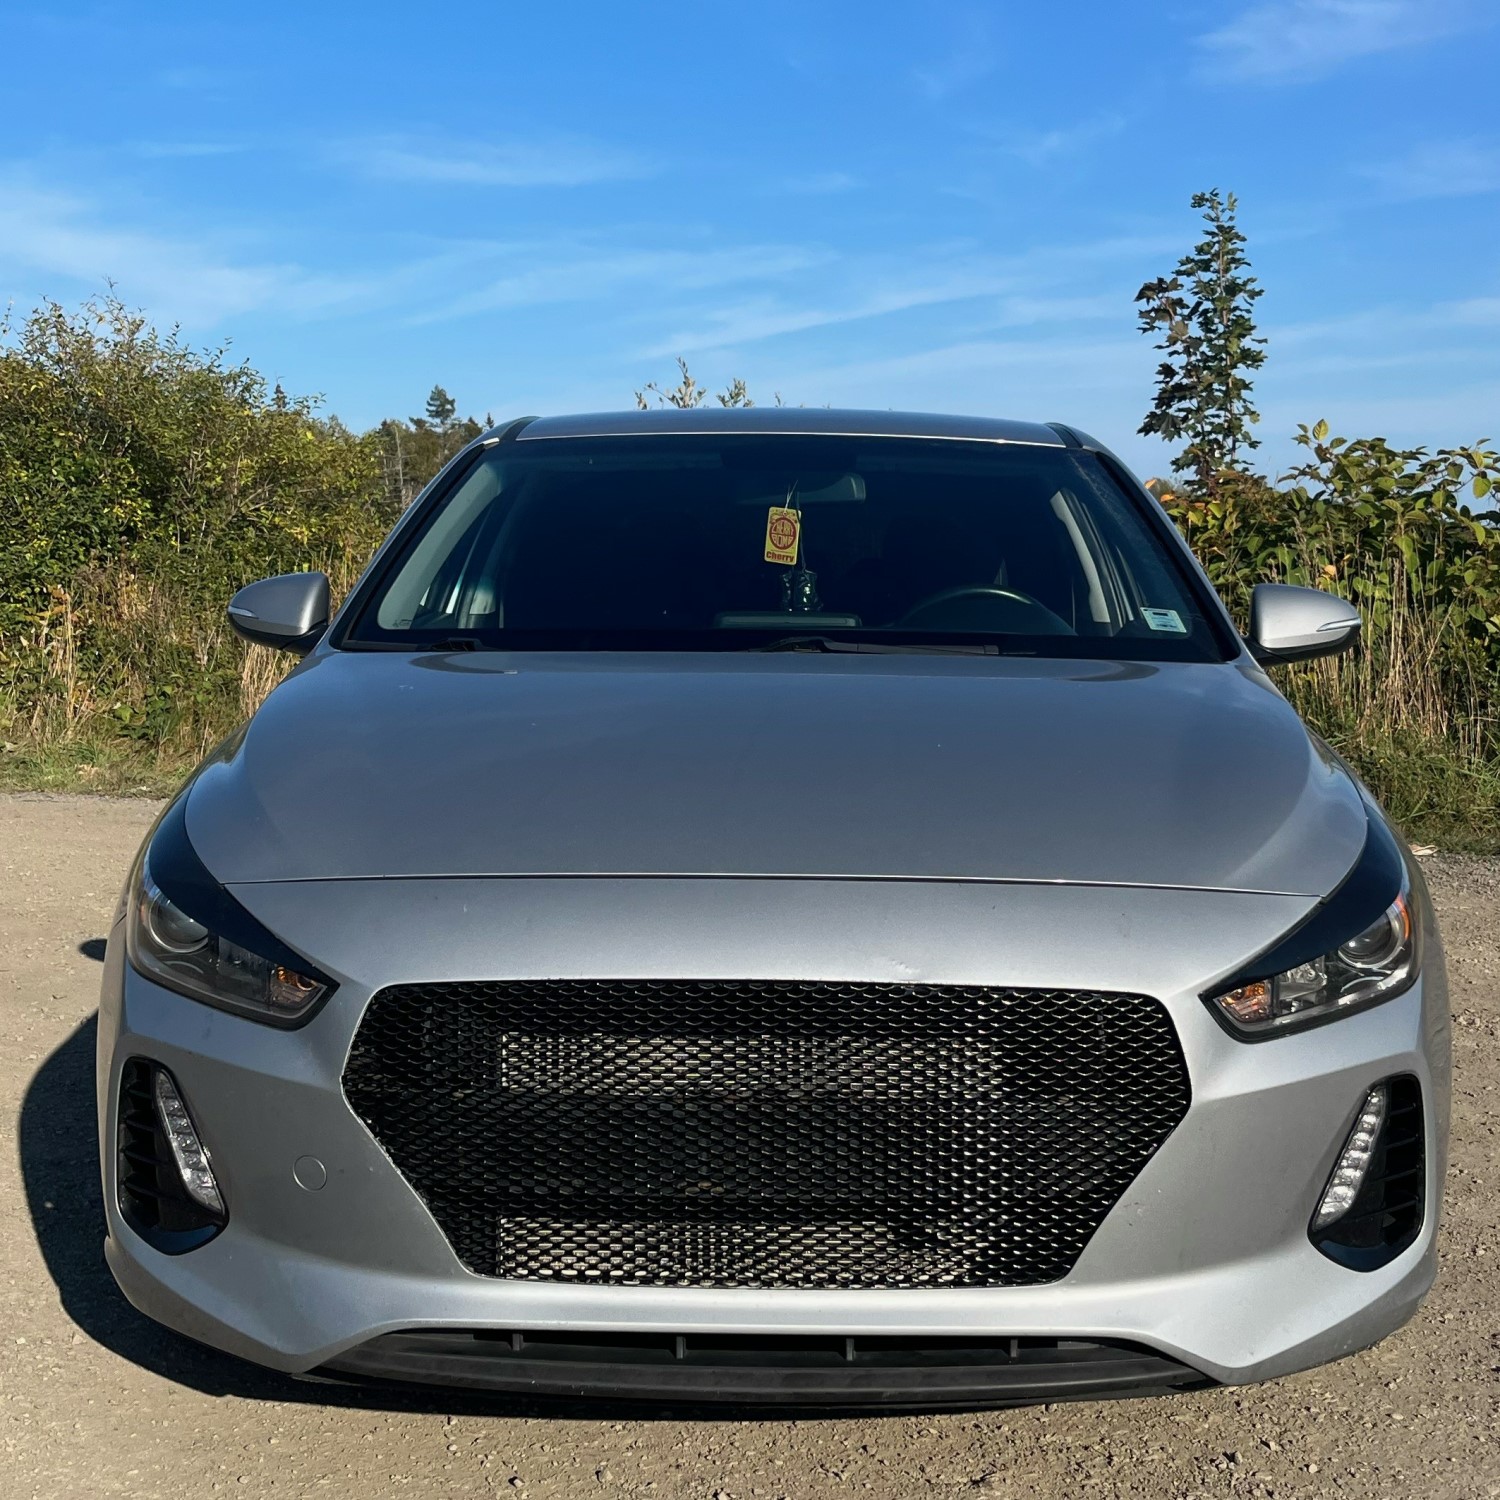 Fresh Install and Fresh Look After Hyundai Elantra GT Grille Mesh Install